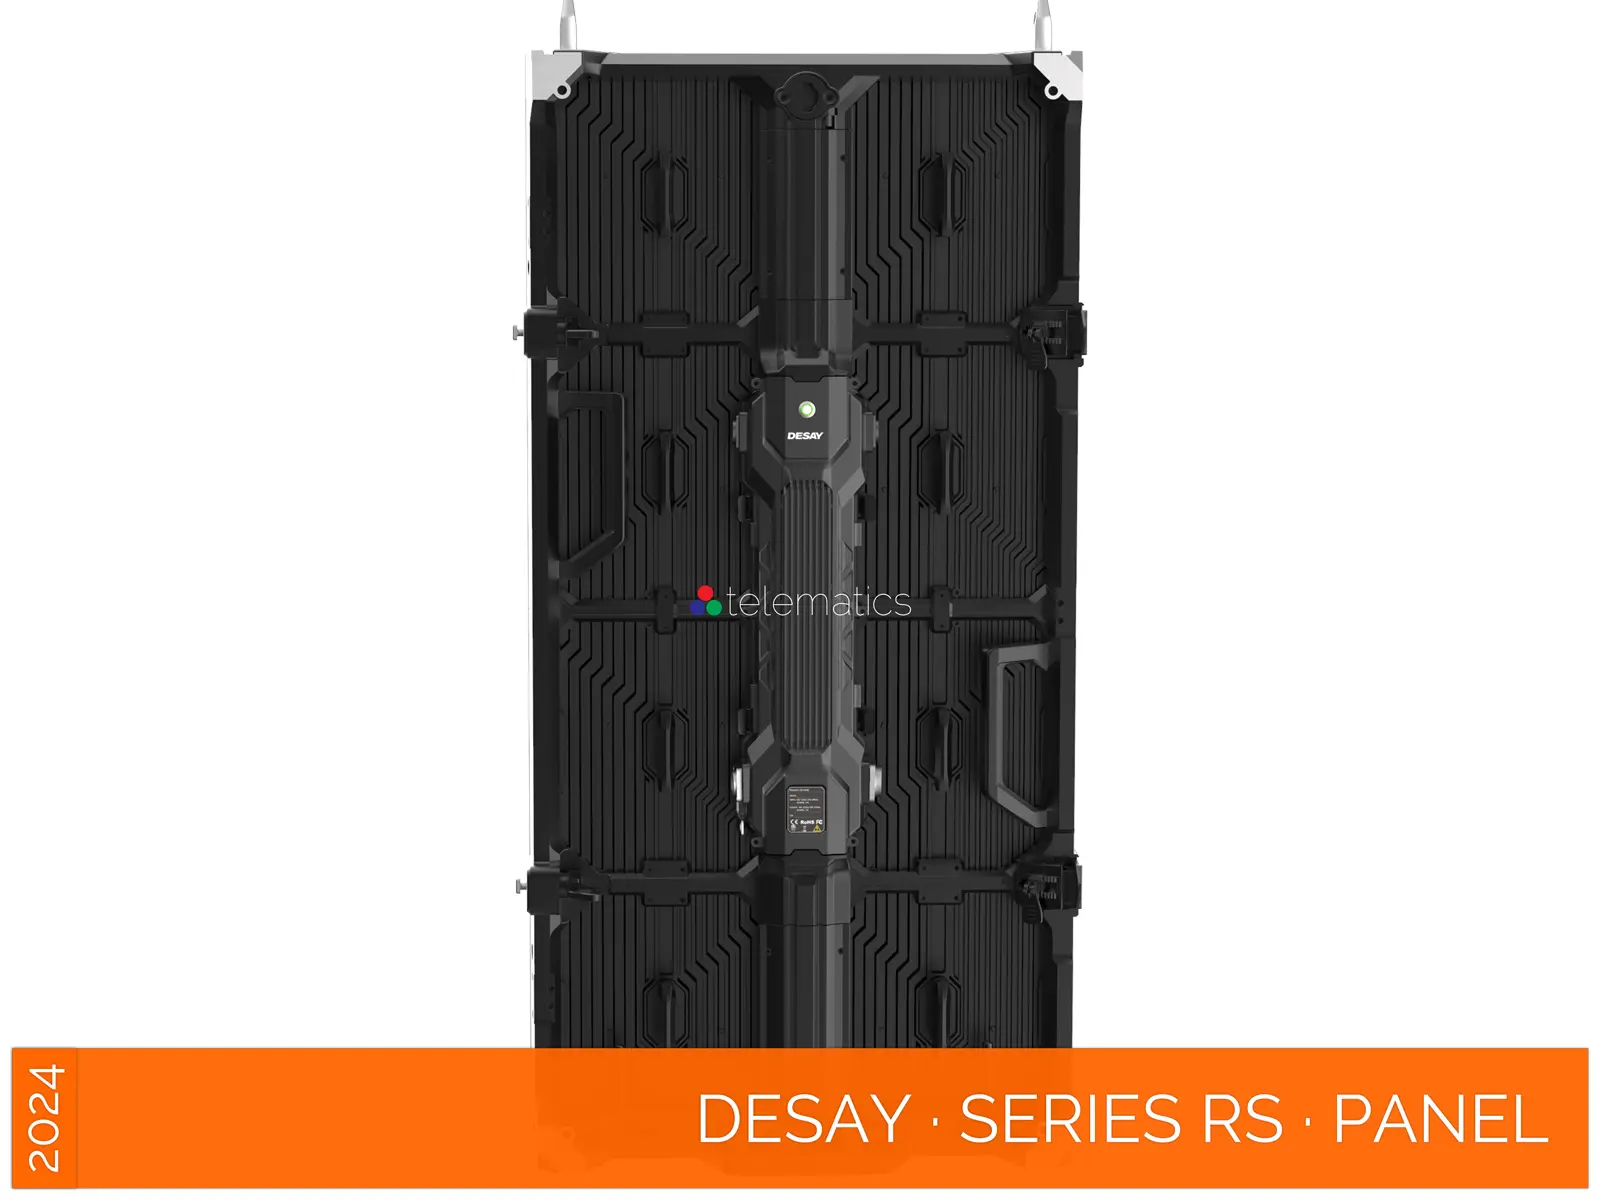 Desay · Series RS · Direct View LED Display Panel · Full Pixel Range · Rental Or Stage · Indoor Rated · Rapid Service And Setup · Robust Panel Build For Rental And Stage · NovaStar COEX MX CX · Vision Management Platform · Viplex · review · price · cost · priced from $1,790 per square meter